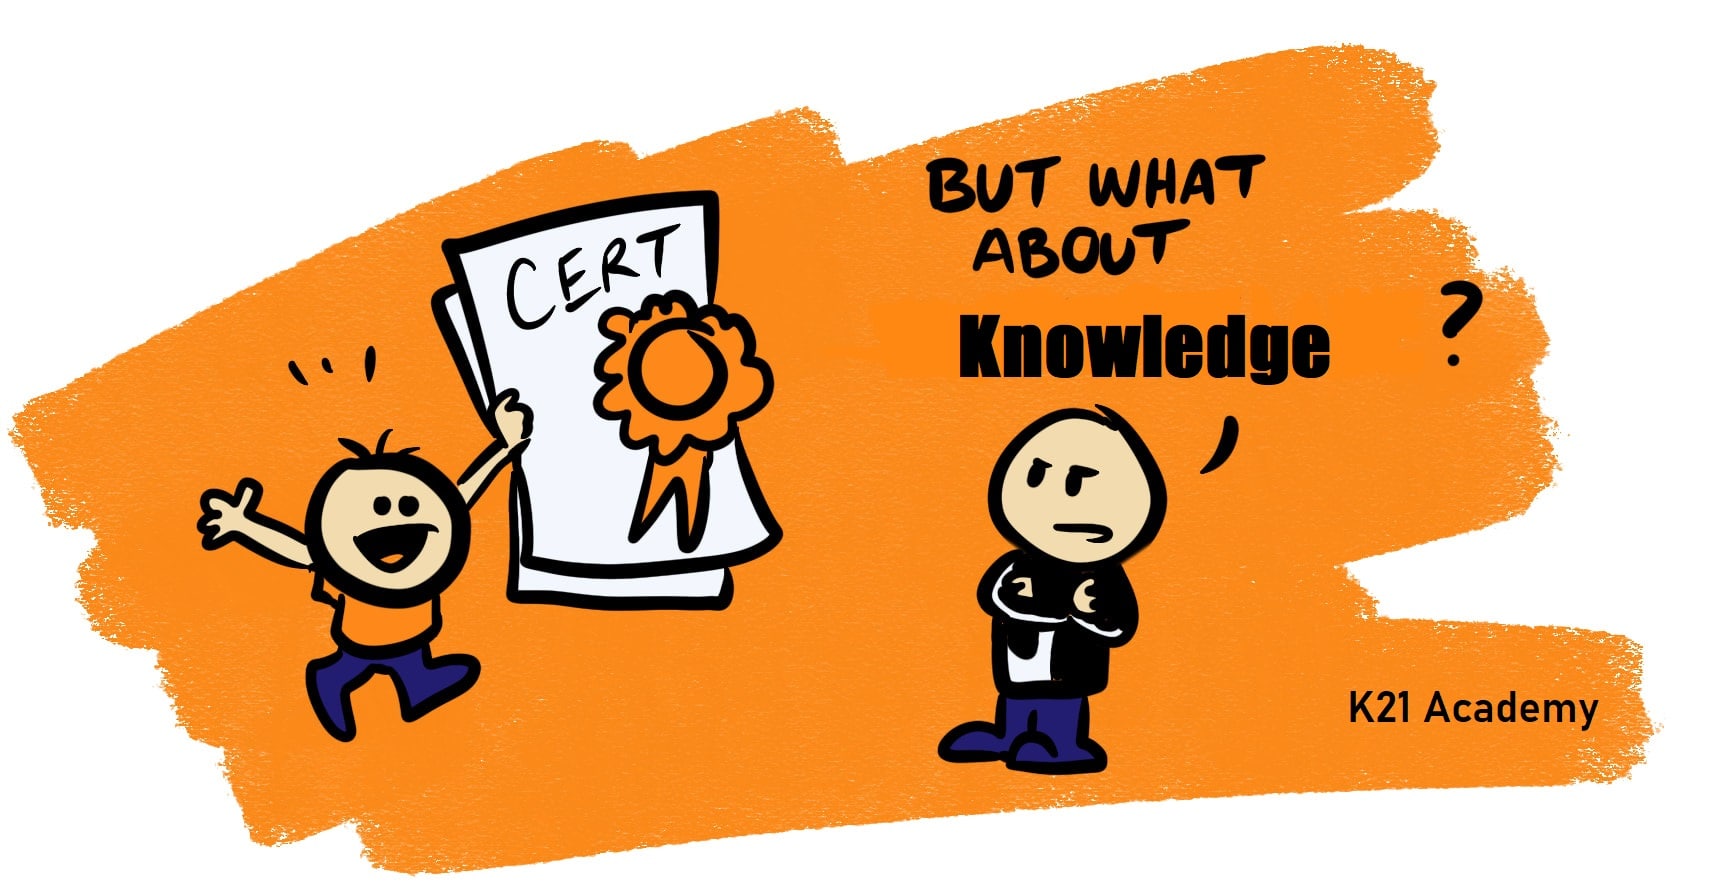 certification or knowledge